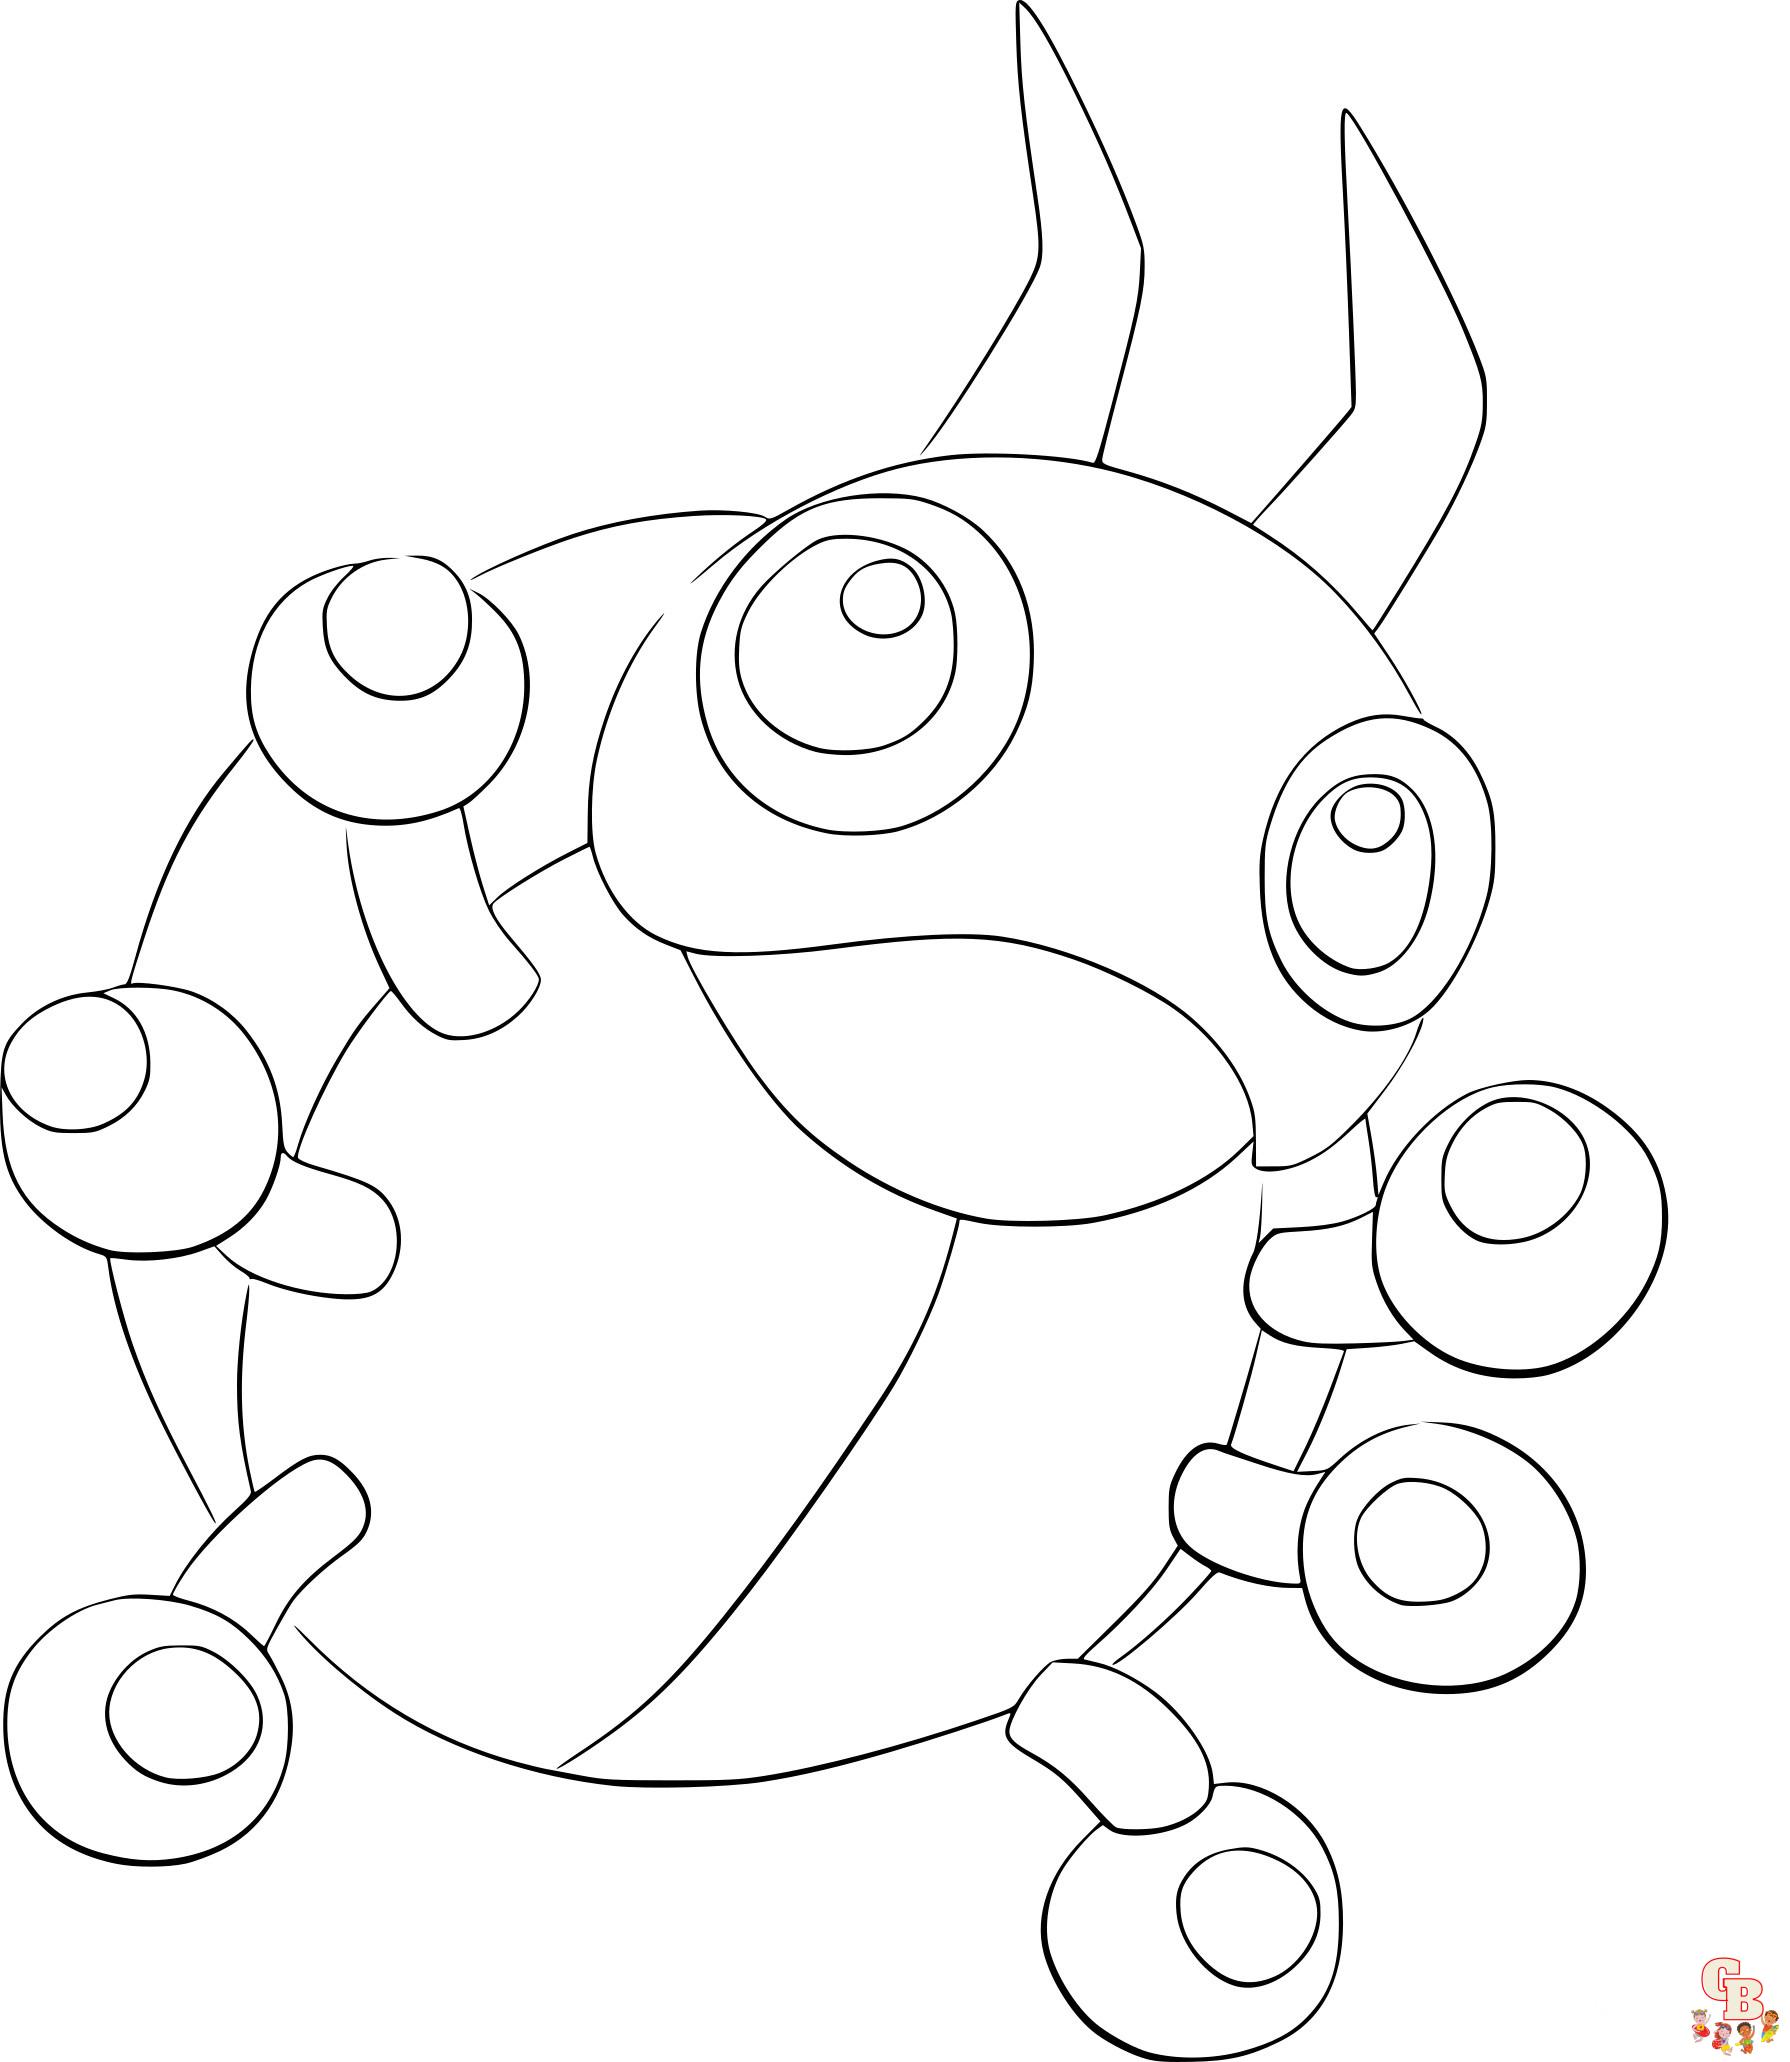 Ledyba Coloring Pages